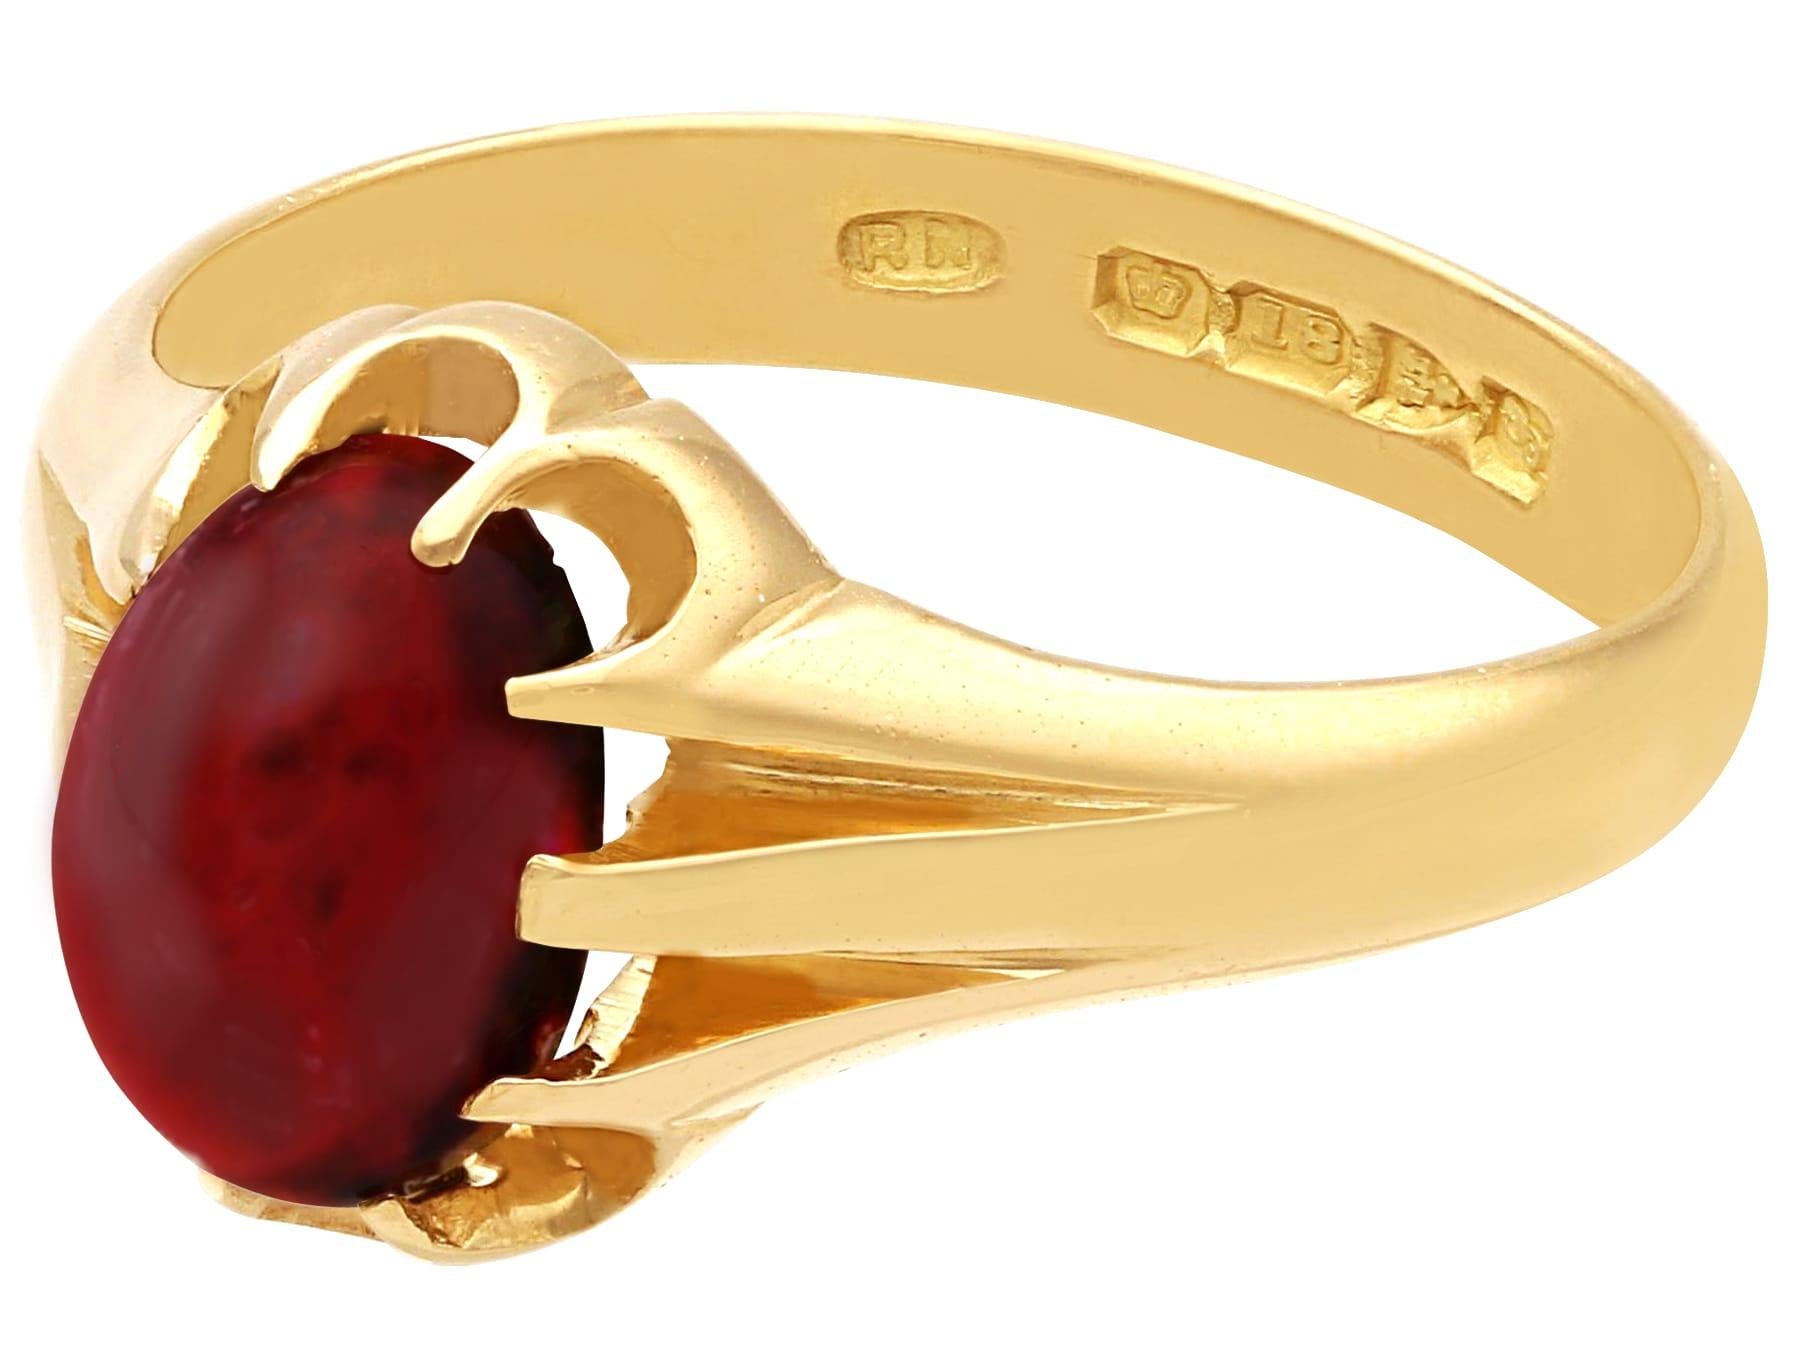 Cabochon Antique 3.05 Carat Garnet and 18k Yellow Gold Dress Ring (1918) For Sale